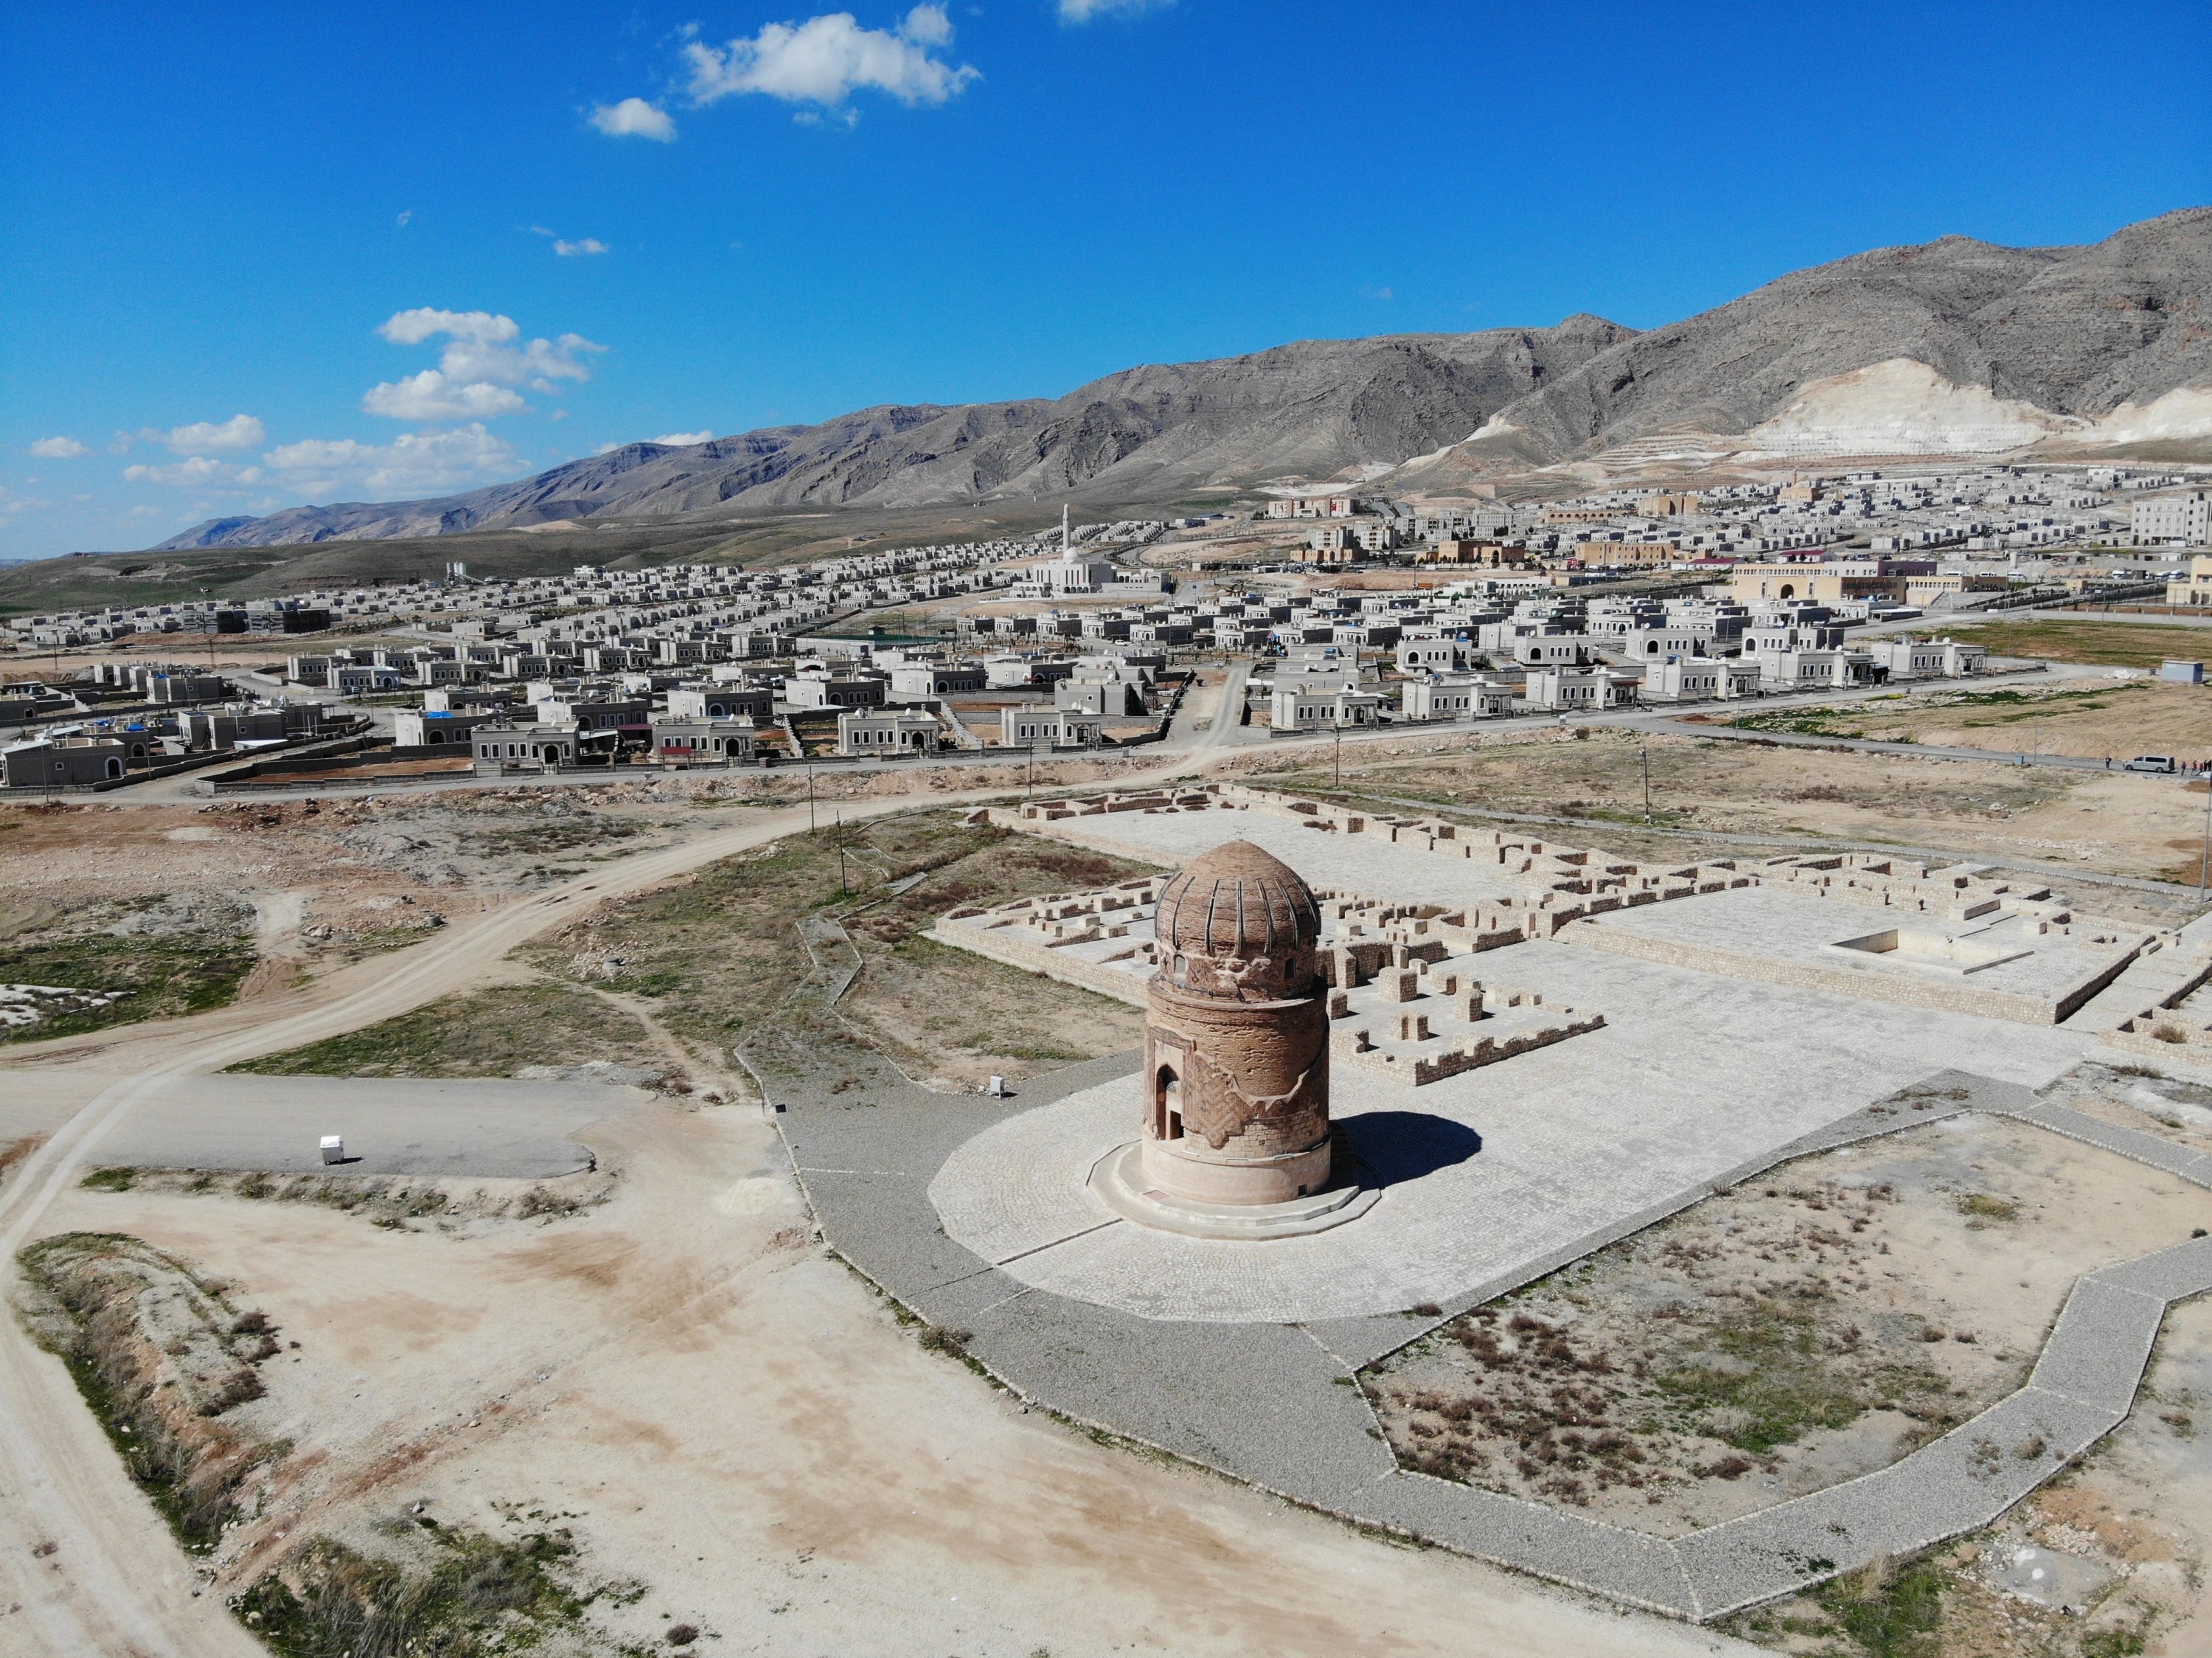 The restoration of artifacts moved from Hasankeyf, the historical district of Batman, which was flooded by the Ilısu Dam, has been completed, Batman, Türkiye, Oct. 11, 2022. (IHA Photo)